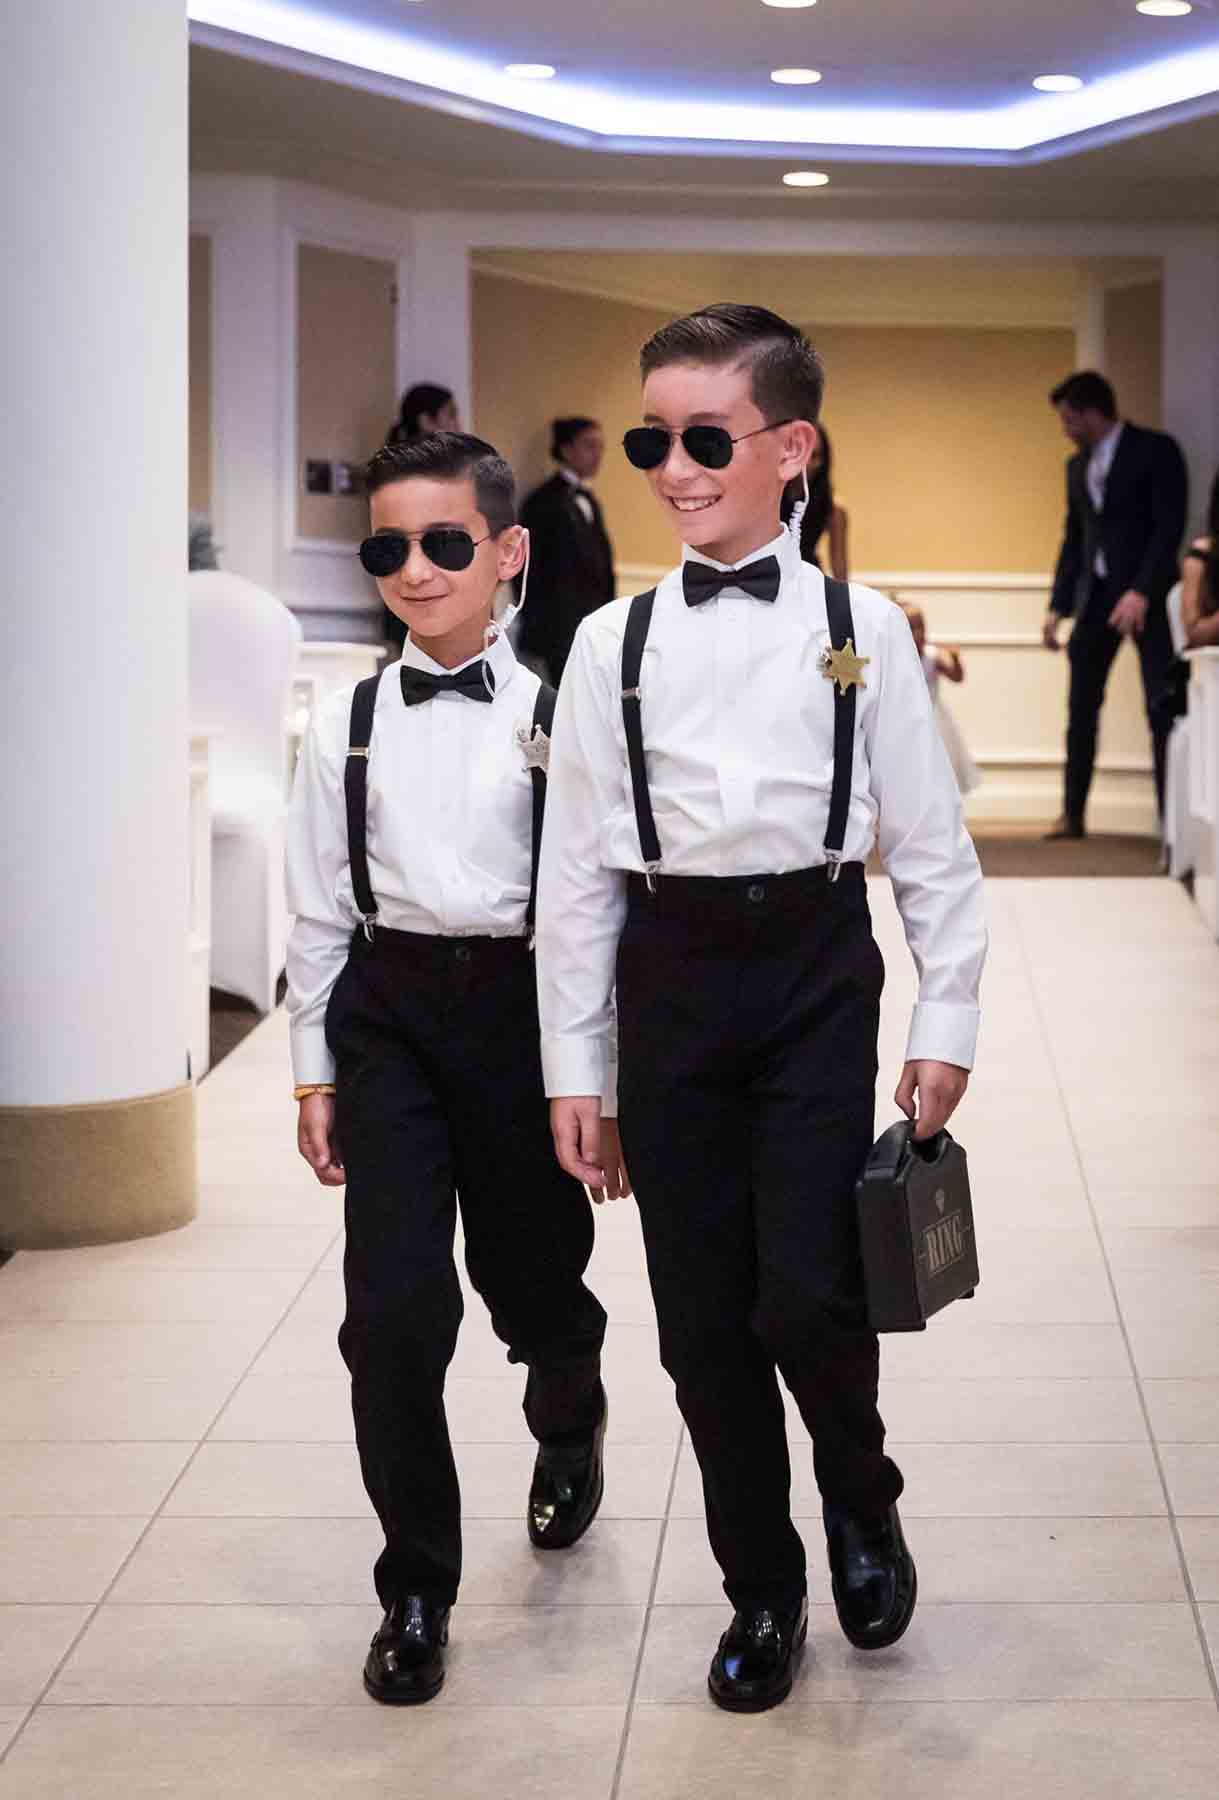 Two little ring bearers dressed as secret service agents for an article on the best wedding jobs for family and friends